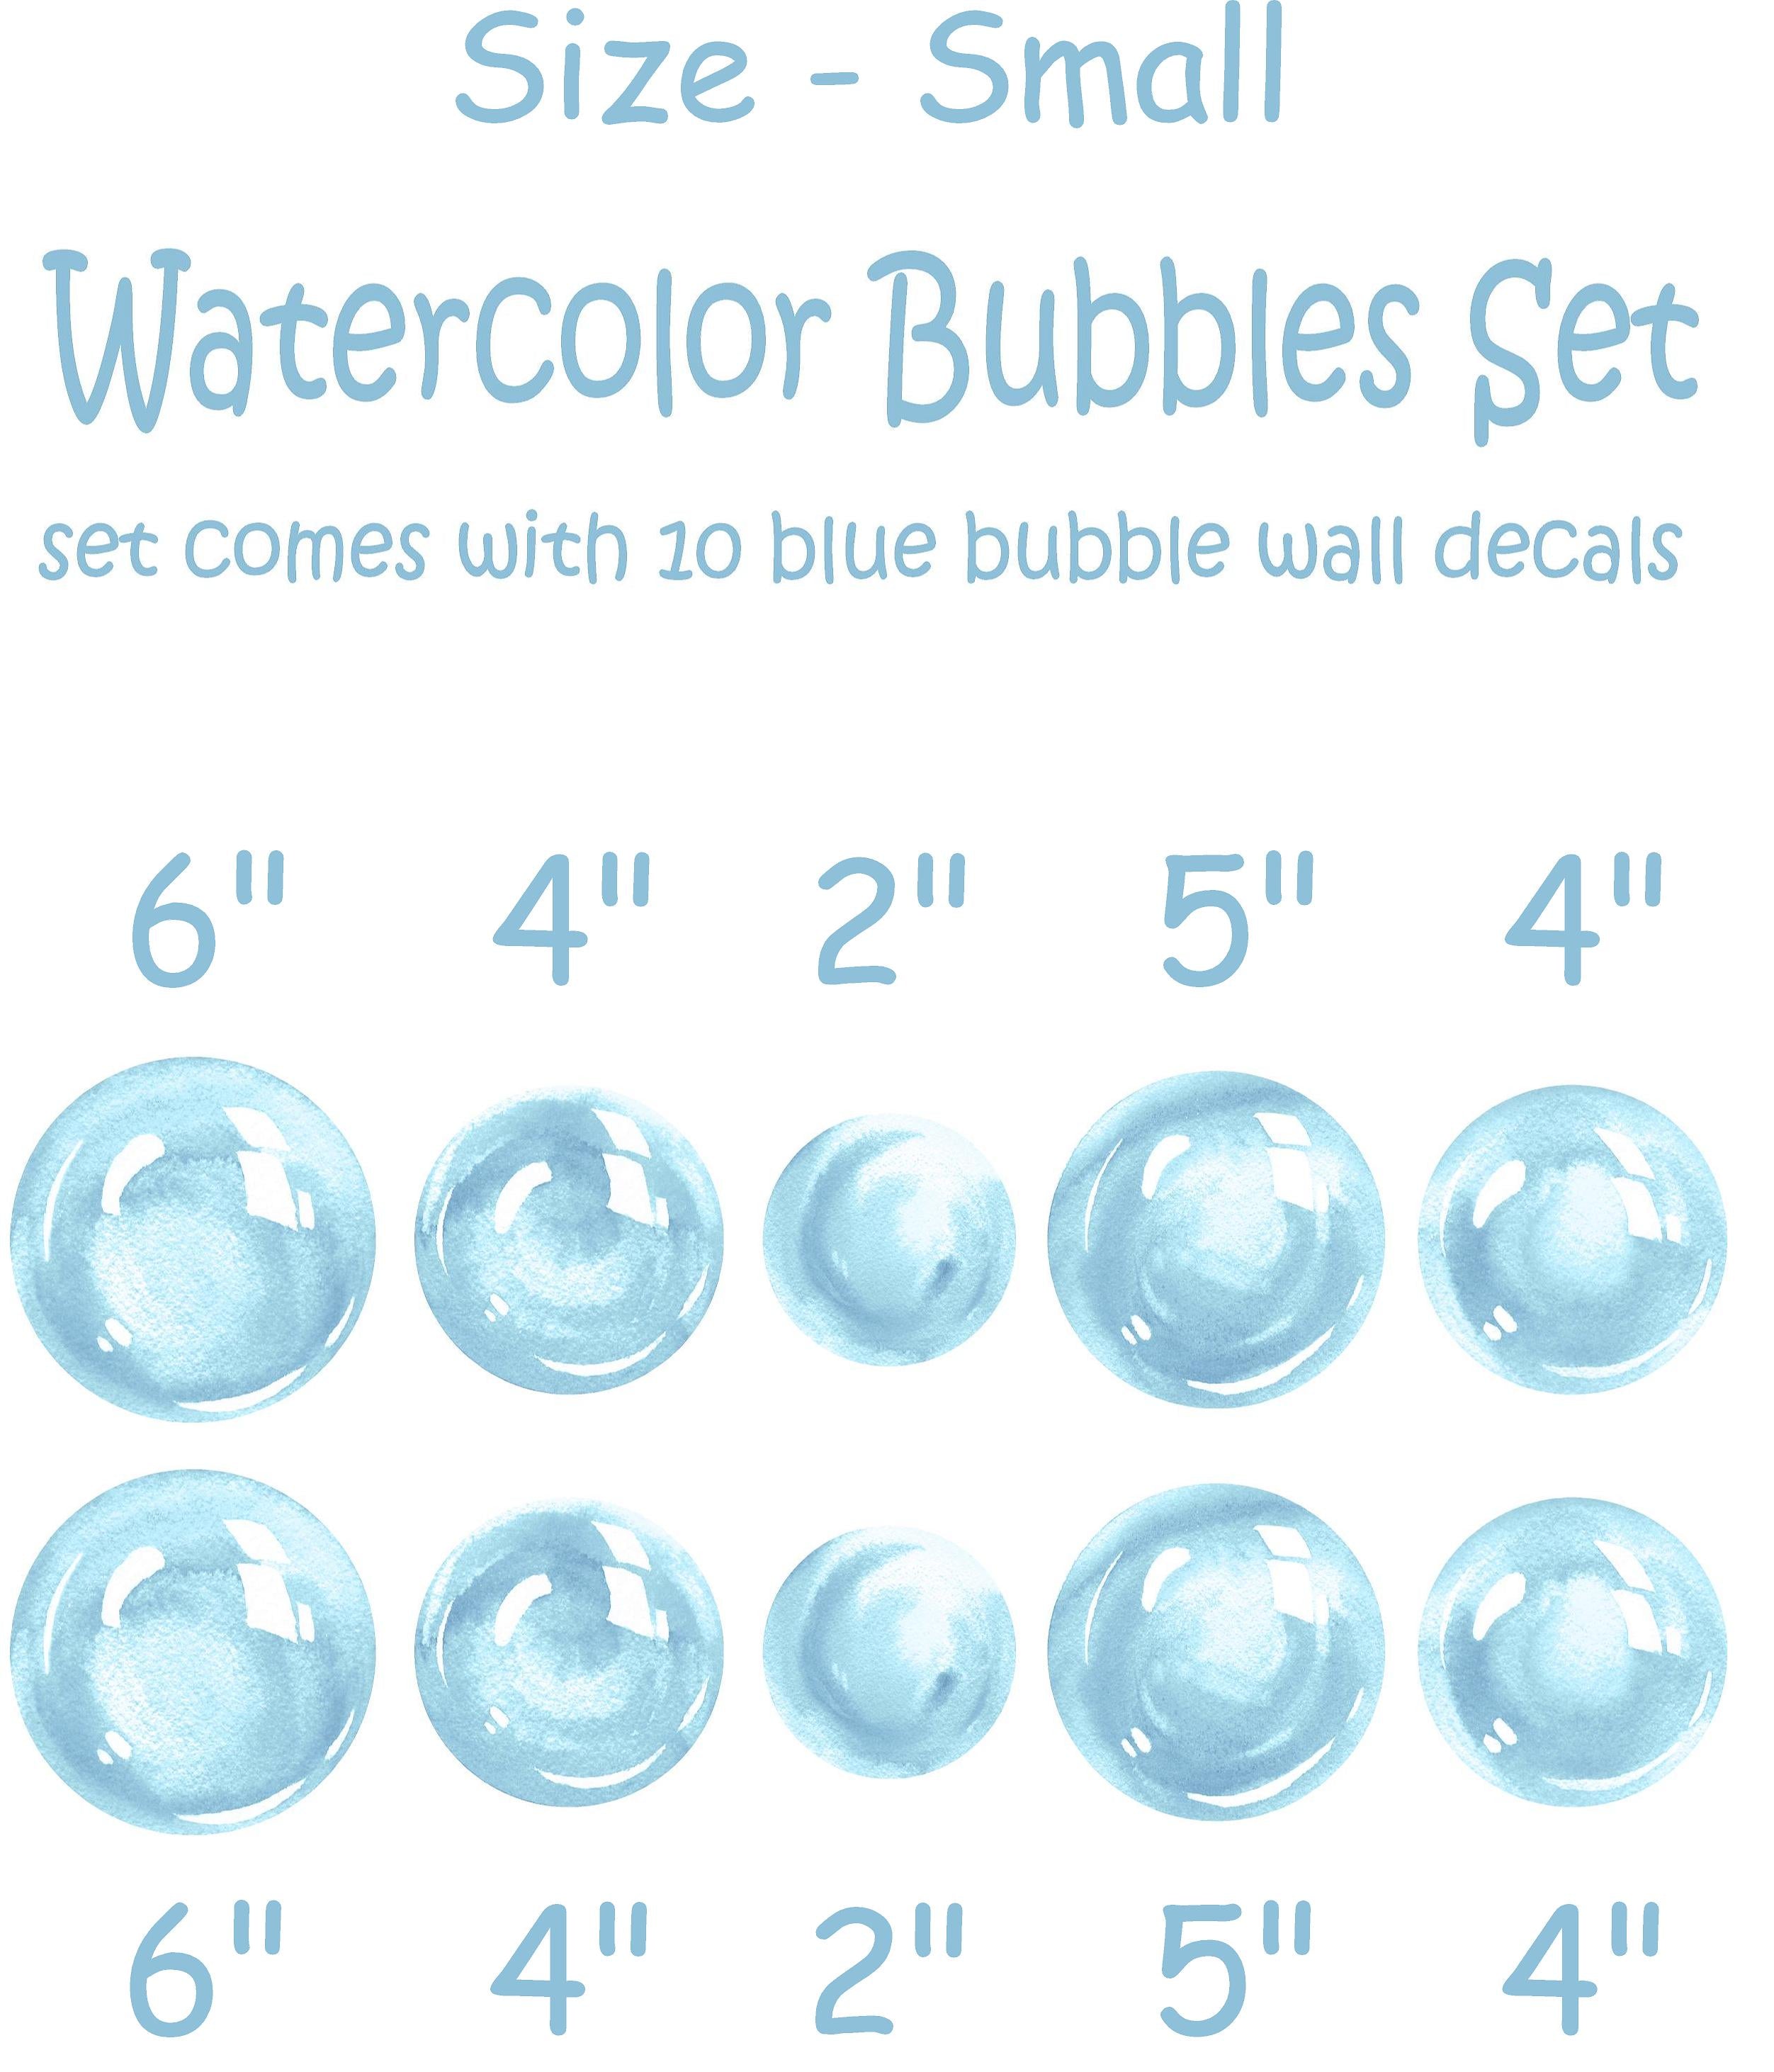 Watercolor Blue Bubbles Wall Decal Set Bubbles Wall Stickers Wall Art Nursery Decor Removable Fabric Vinyl Wall Stickers SIZE SMALL | DecalBaby